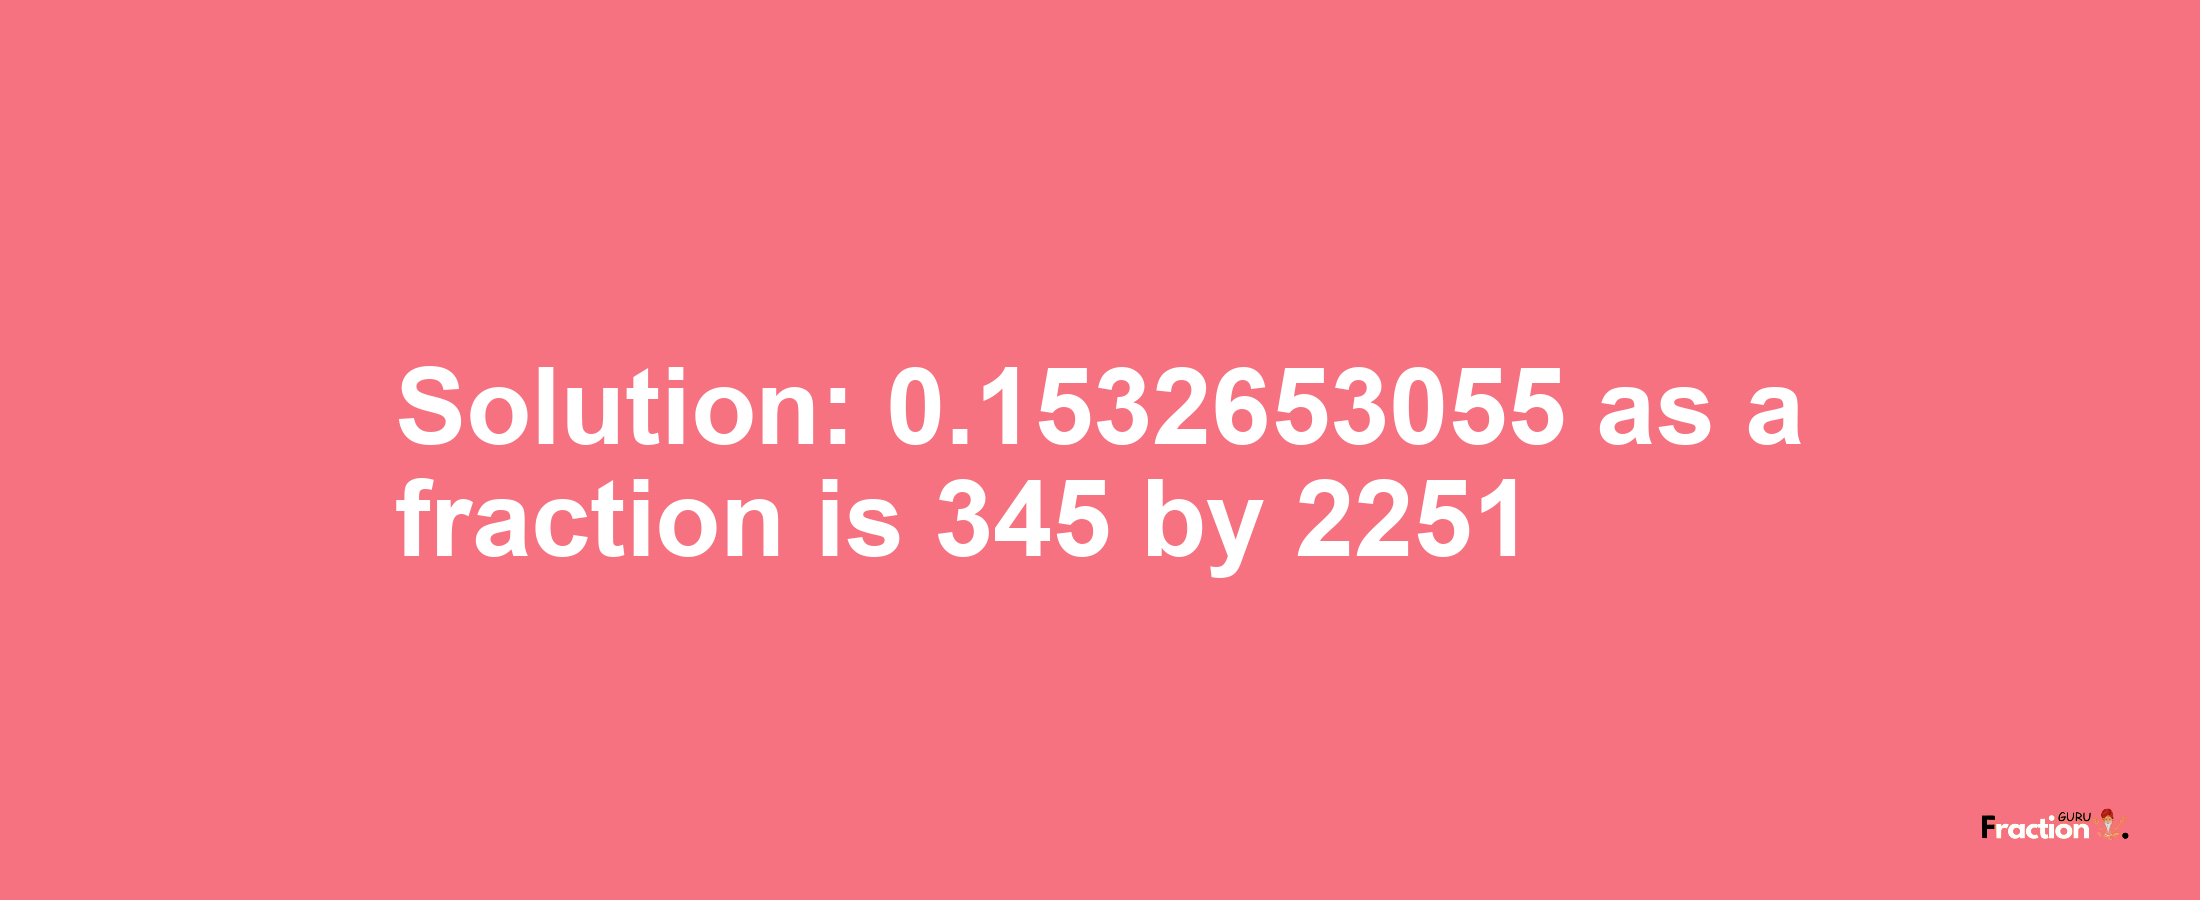 Solution:0.1532653055 as a fraction is 345/2251